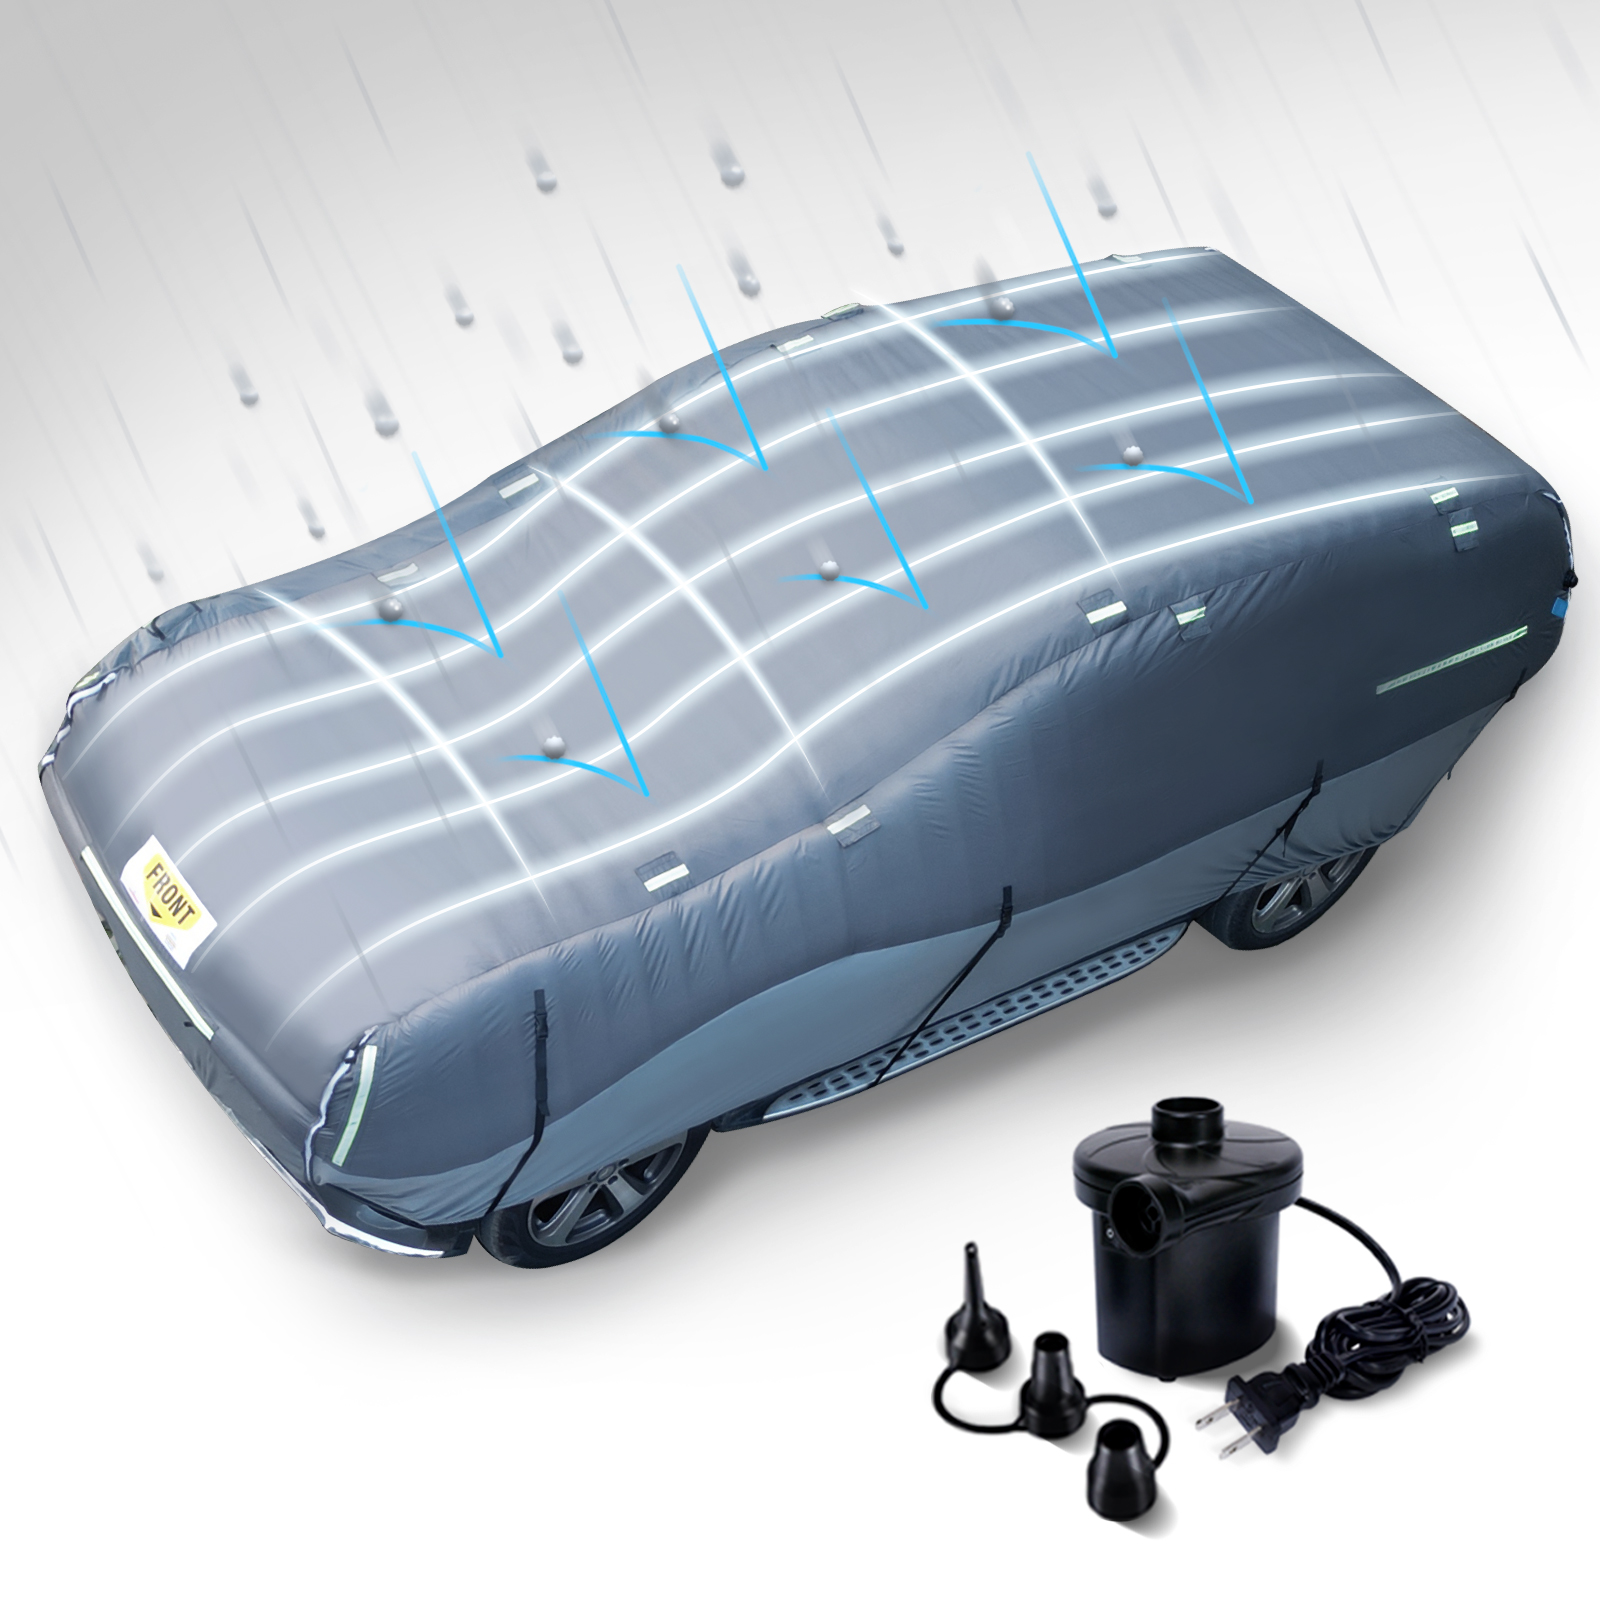 Hail Protector Car Cover Compatible With MG Motor UK Zs,Applicable To Most  170.2*71.2*63.8 Foot Models.Cotton Car Cover,Breathable And